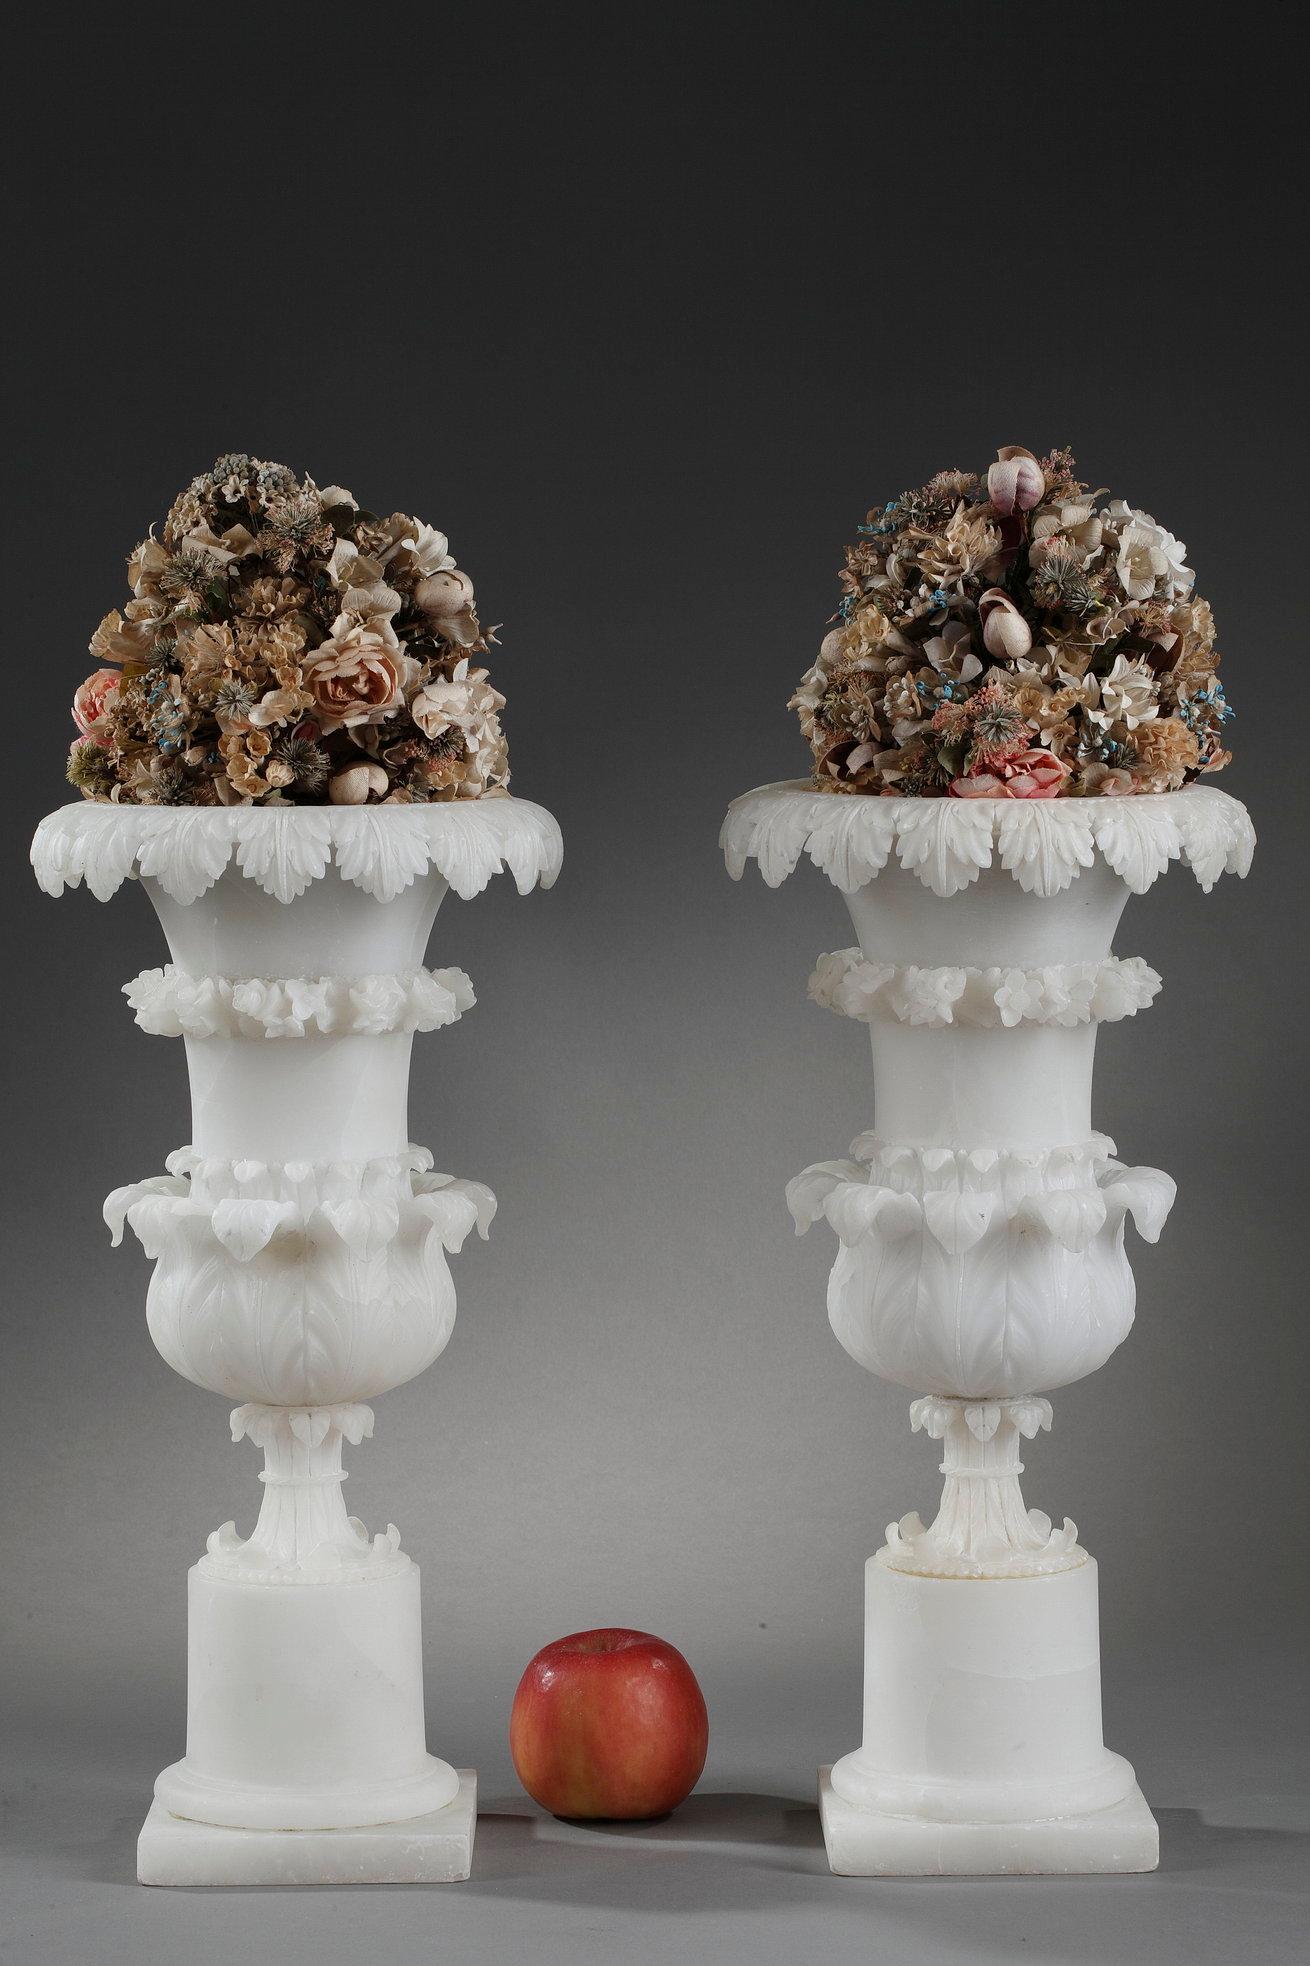 Pair of alabaster Medici vases with foliage from the Charles X period. The lip and the heel are underlined by foliage. The neck is decorated with a border of flowers. each of the vases rests on a cylindric base. 

This long and flared shape comes